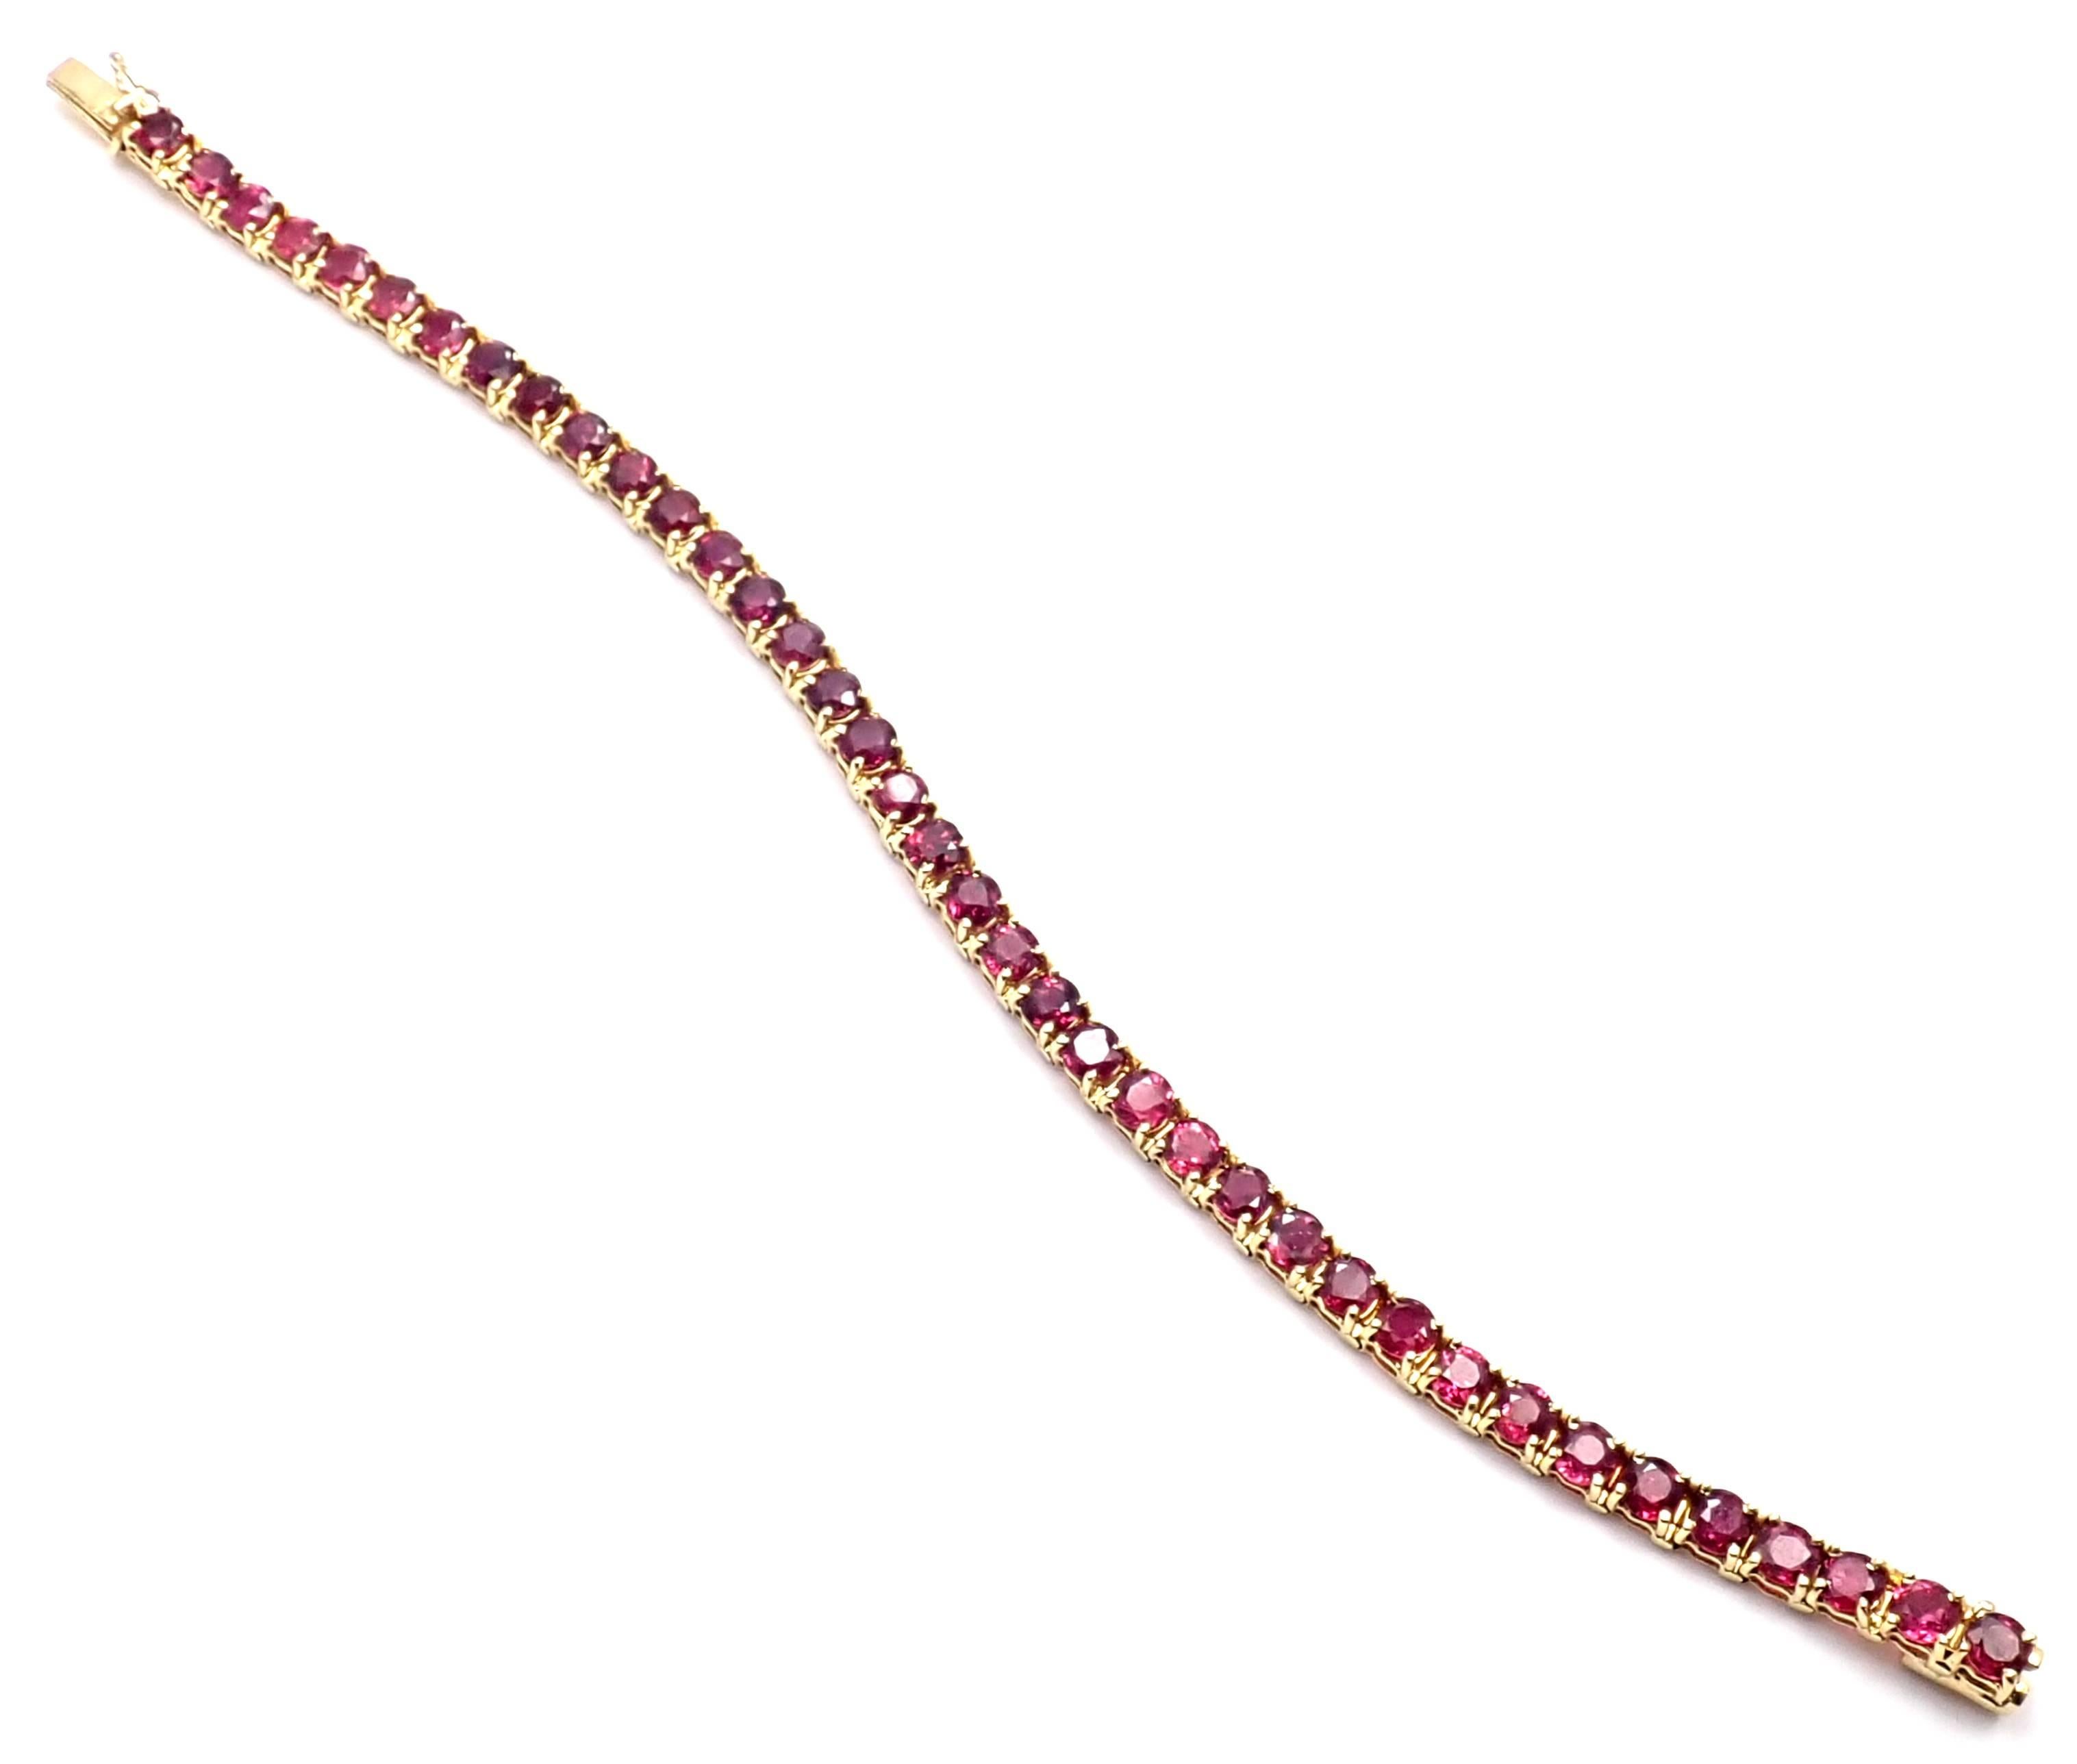 18k Yellow Gold Ruby Tennis Bracelet by Van Cleef & Arpels. 
With 38 round cut rubies total weight approx. 9.5ct
All rubies are no heat, since Van Cleef & Arpels only uses the best stones.
Van Cleef & Arpels chooses stones, which are as clean as